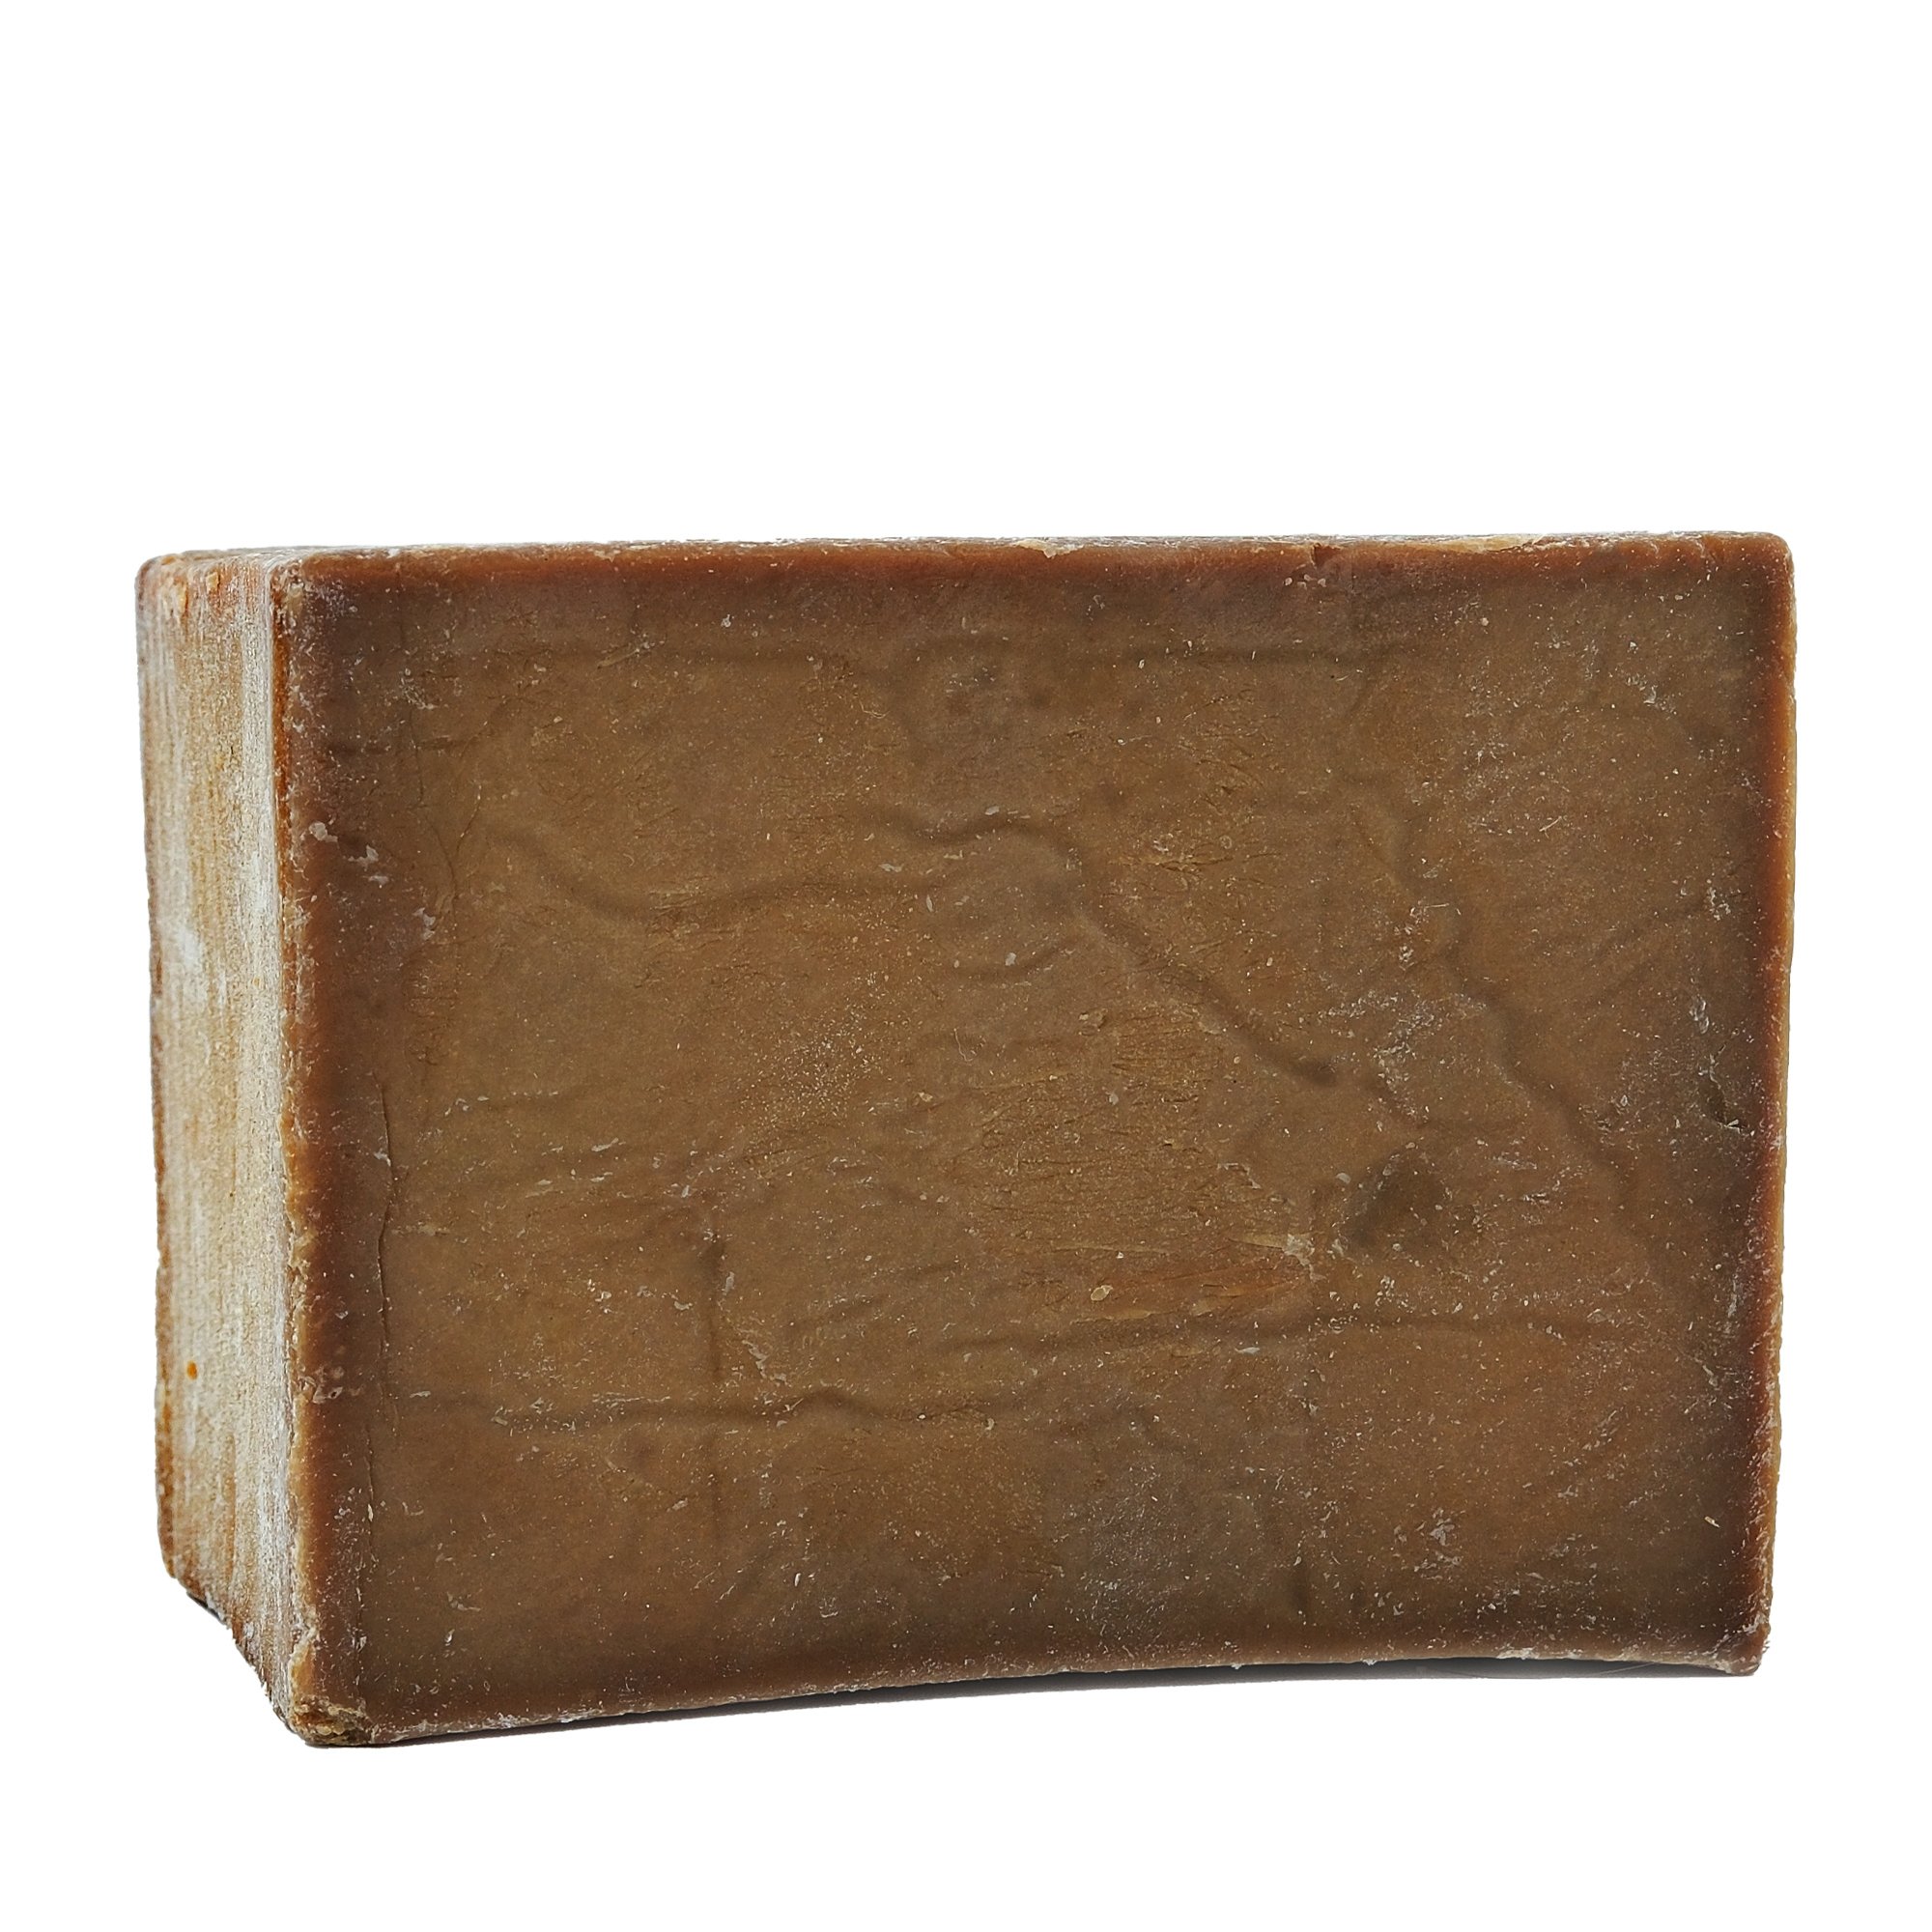 Mesopotamia 180 G Aleppo Soap with 10% Laurel  and 90% Olive Oil Organic Handmade Natural Moisturizer for Dry and Normal Skin